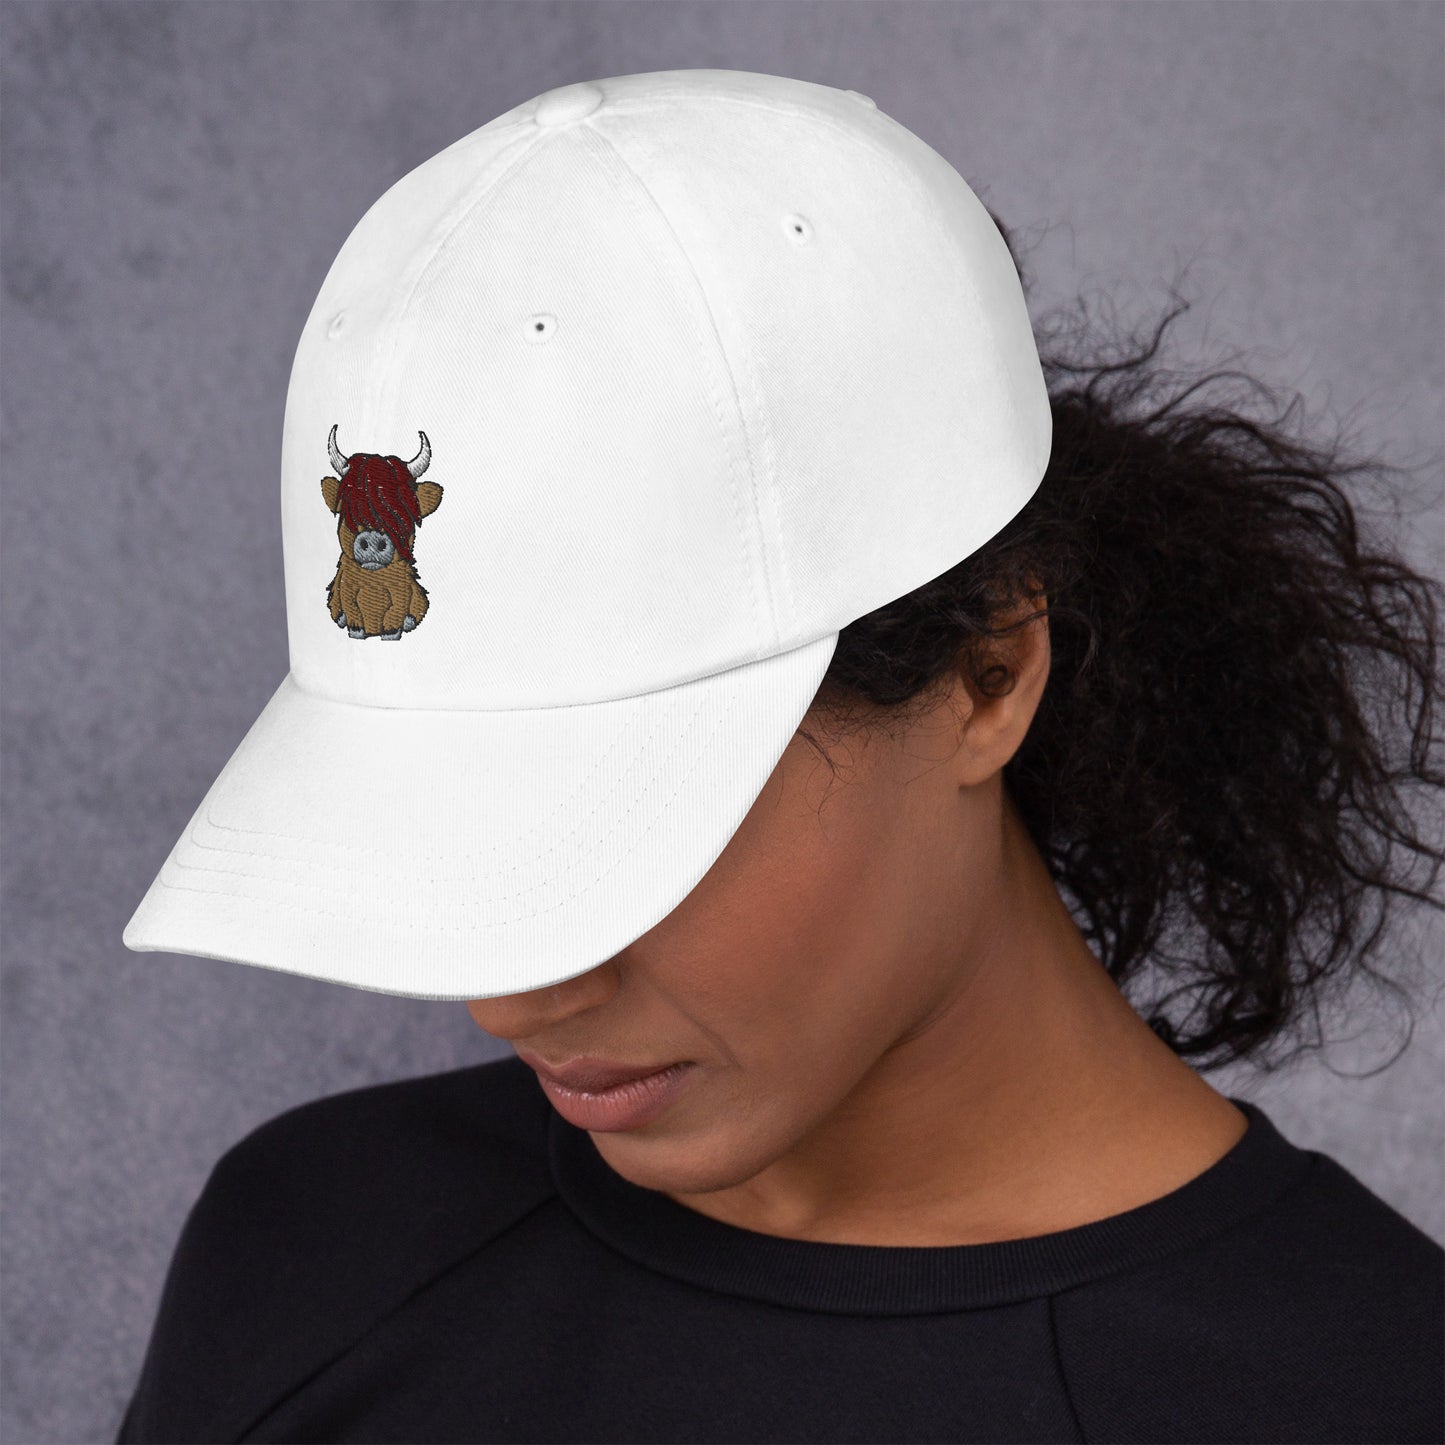 Scottish Highland Cow Embroidered Dad Hat - The Global Wanderer